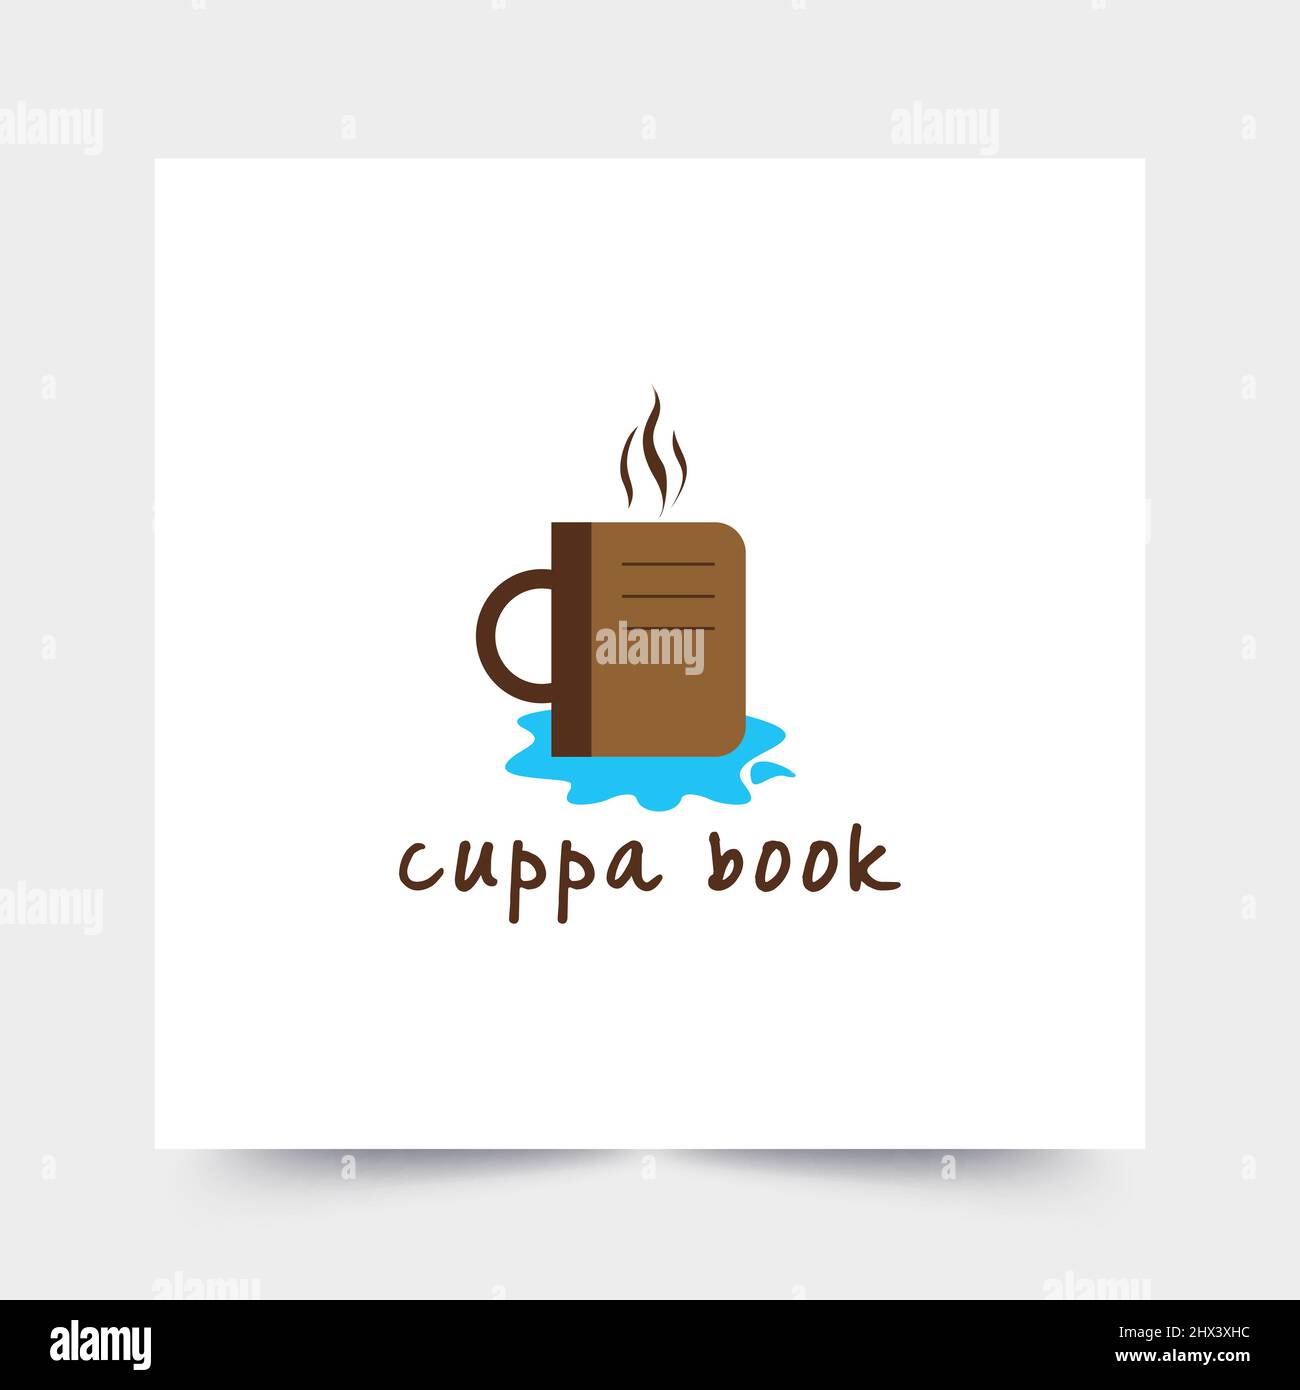 Simple and creative cup and book logos Stock Vector